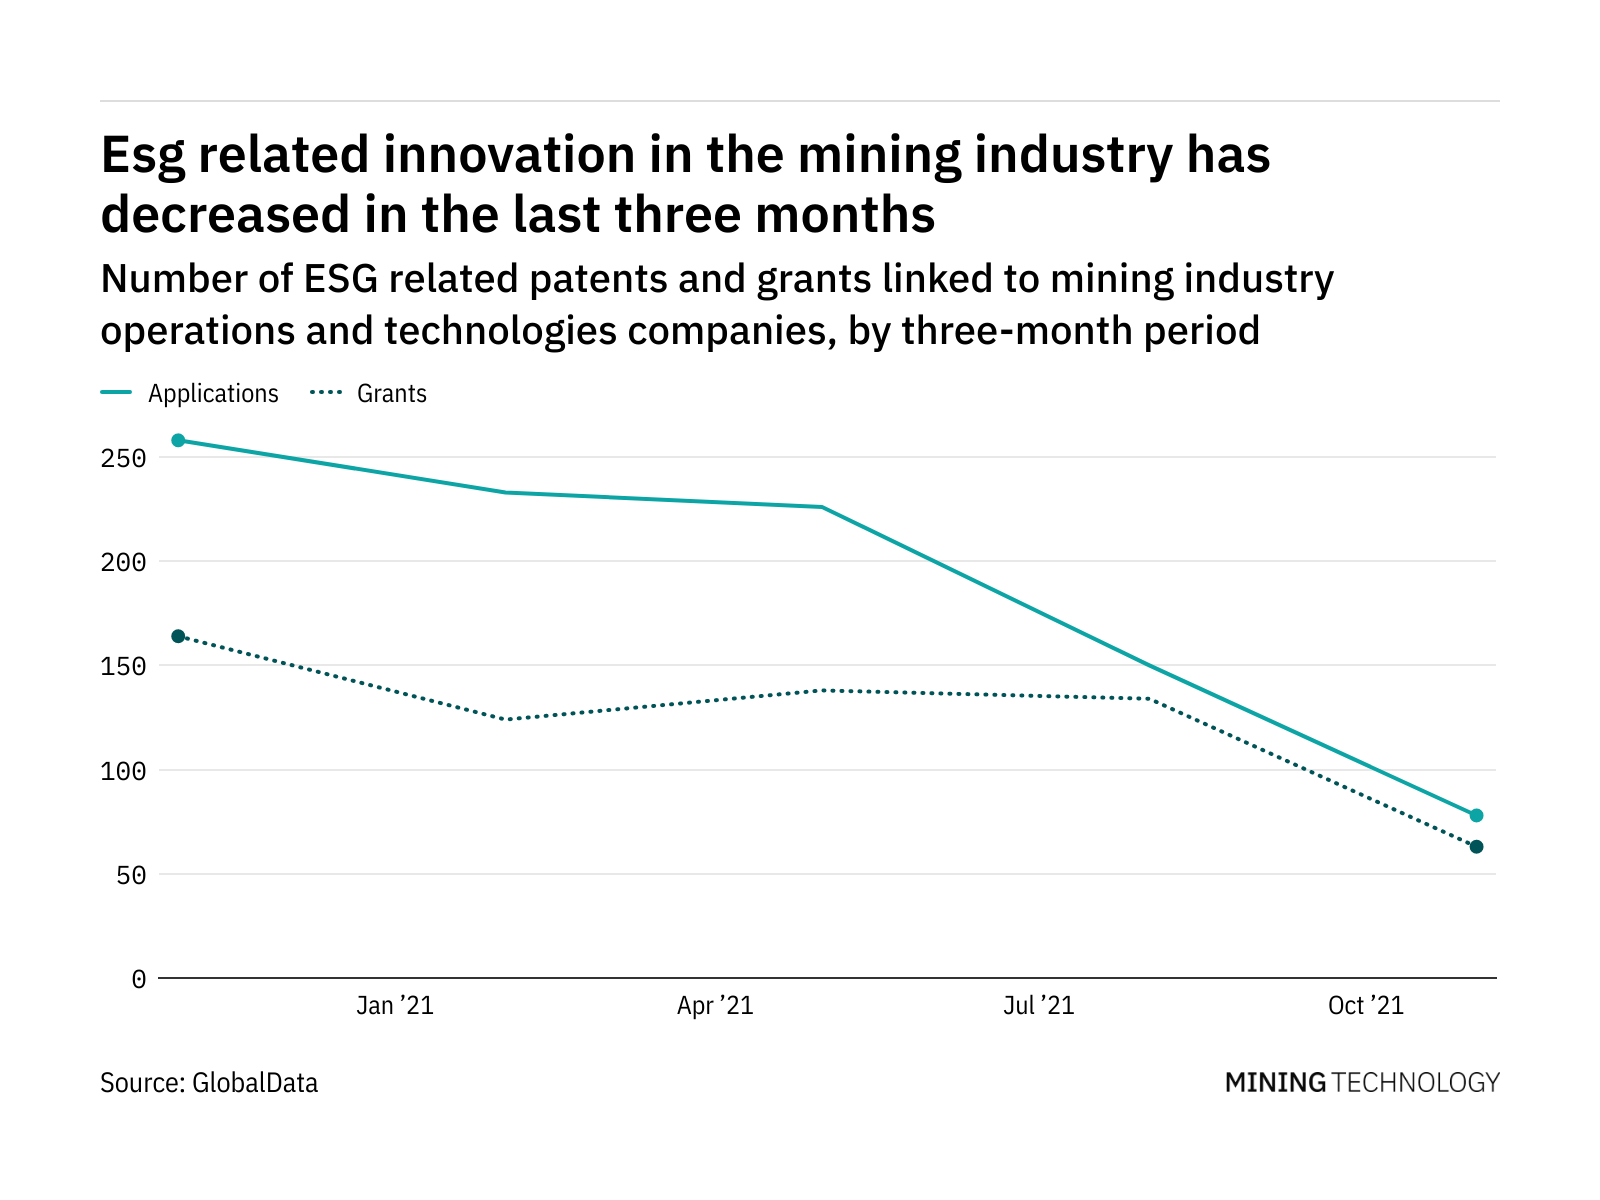 ESG innovation among mining industry companies has dropped off in the last year